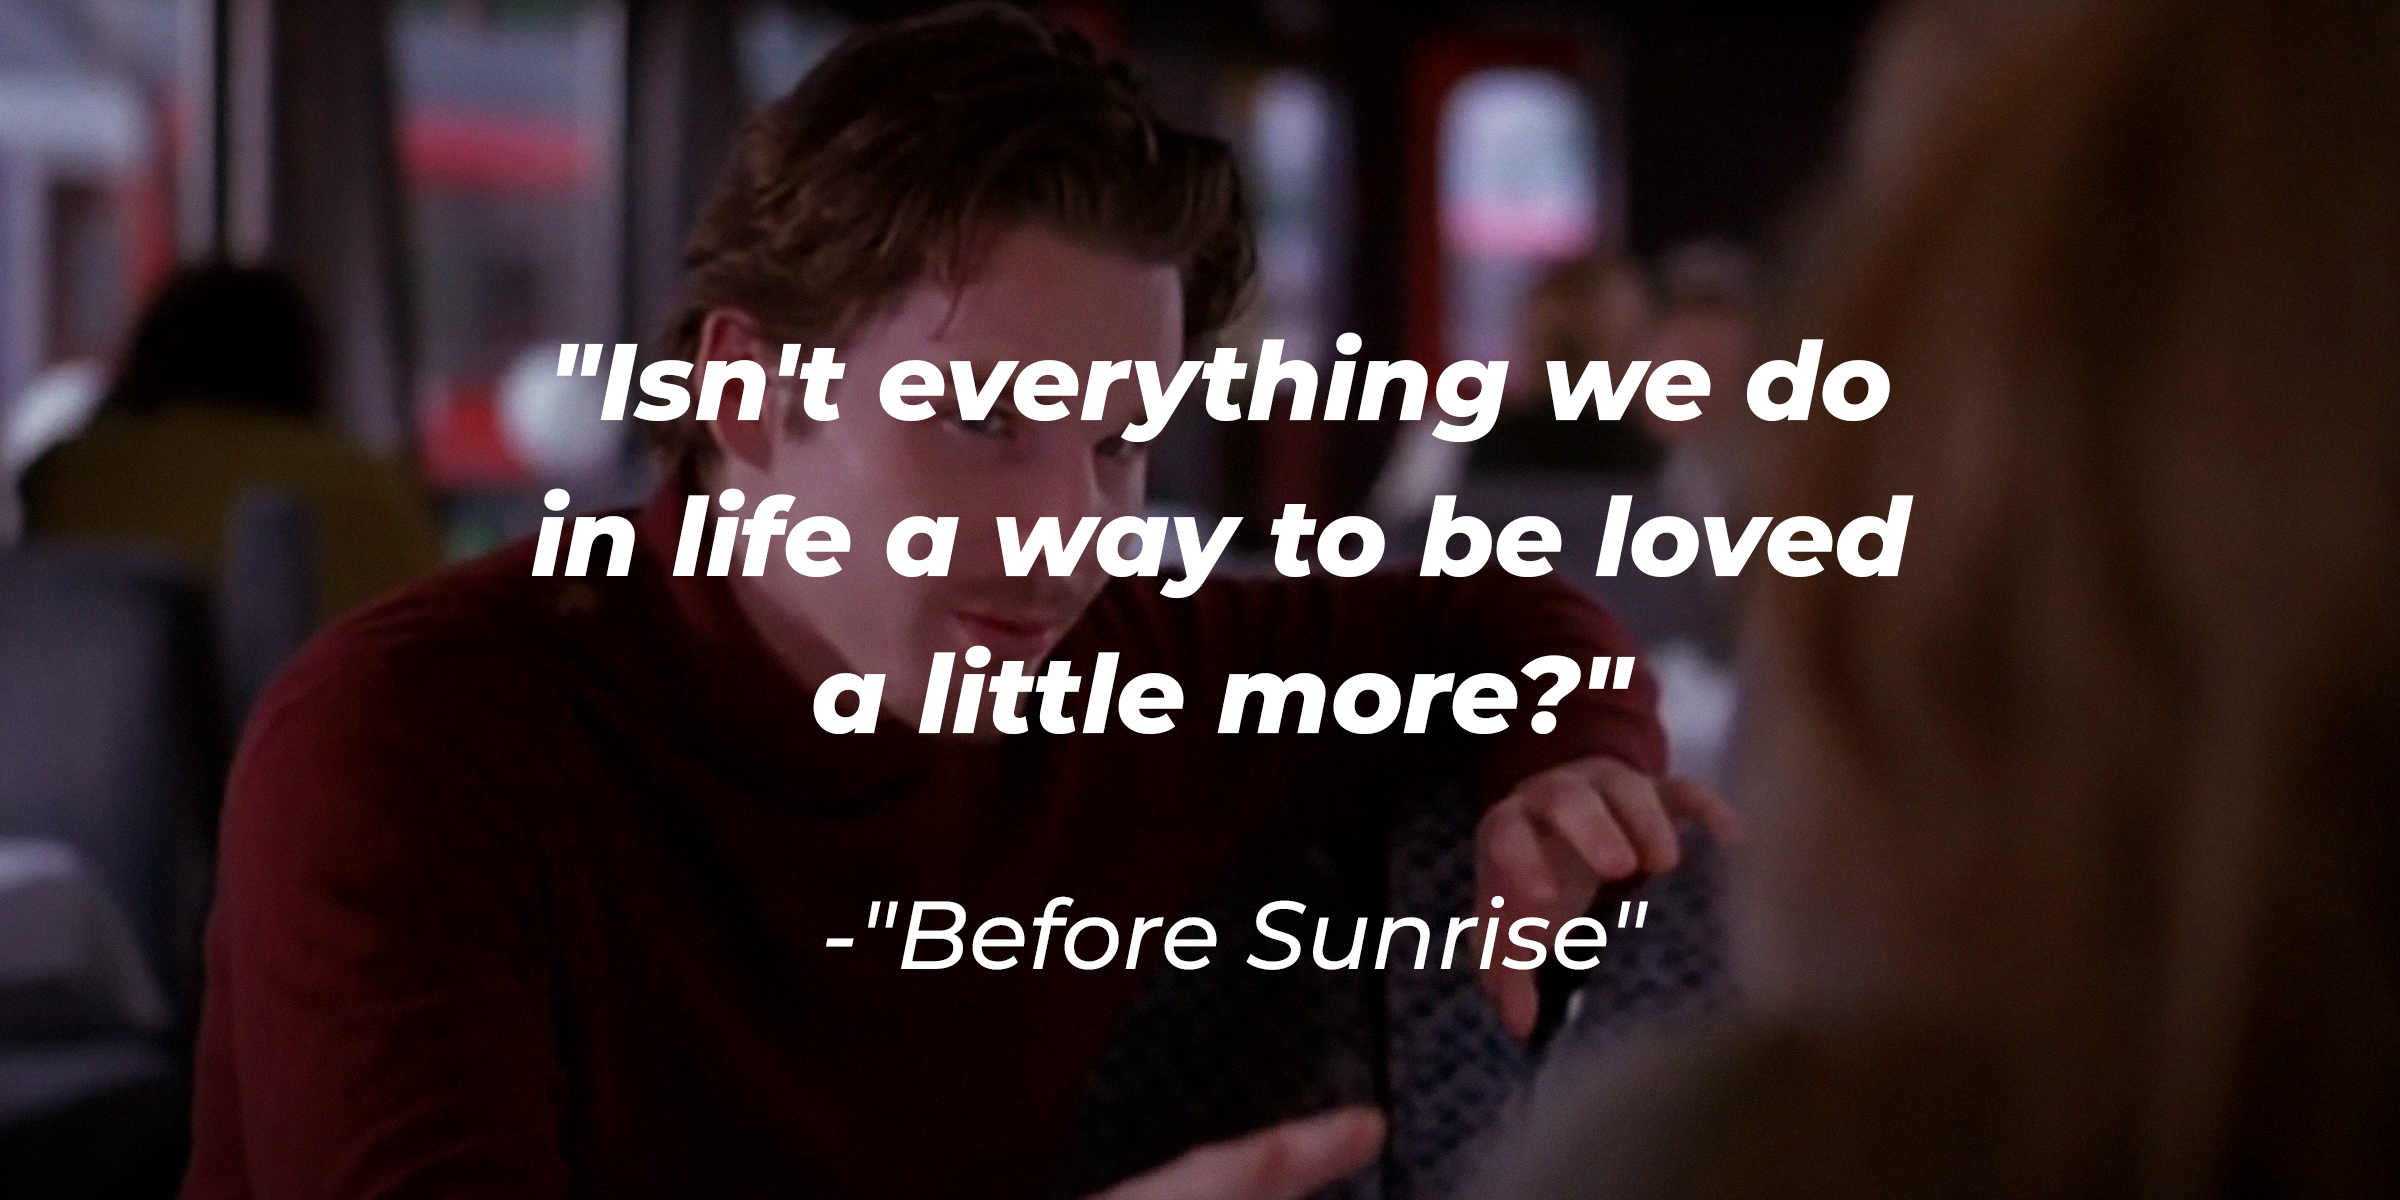 A photo of Jesse with the "Before Sunrise" quote: "Isn't everything we do in life a way to be loved a little more?" | Source: facebook.com/BeforeSunriseWB